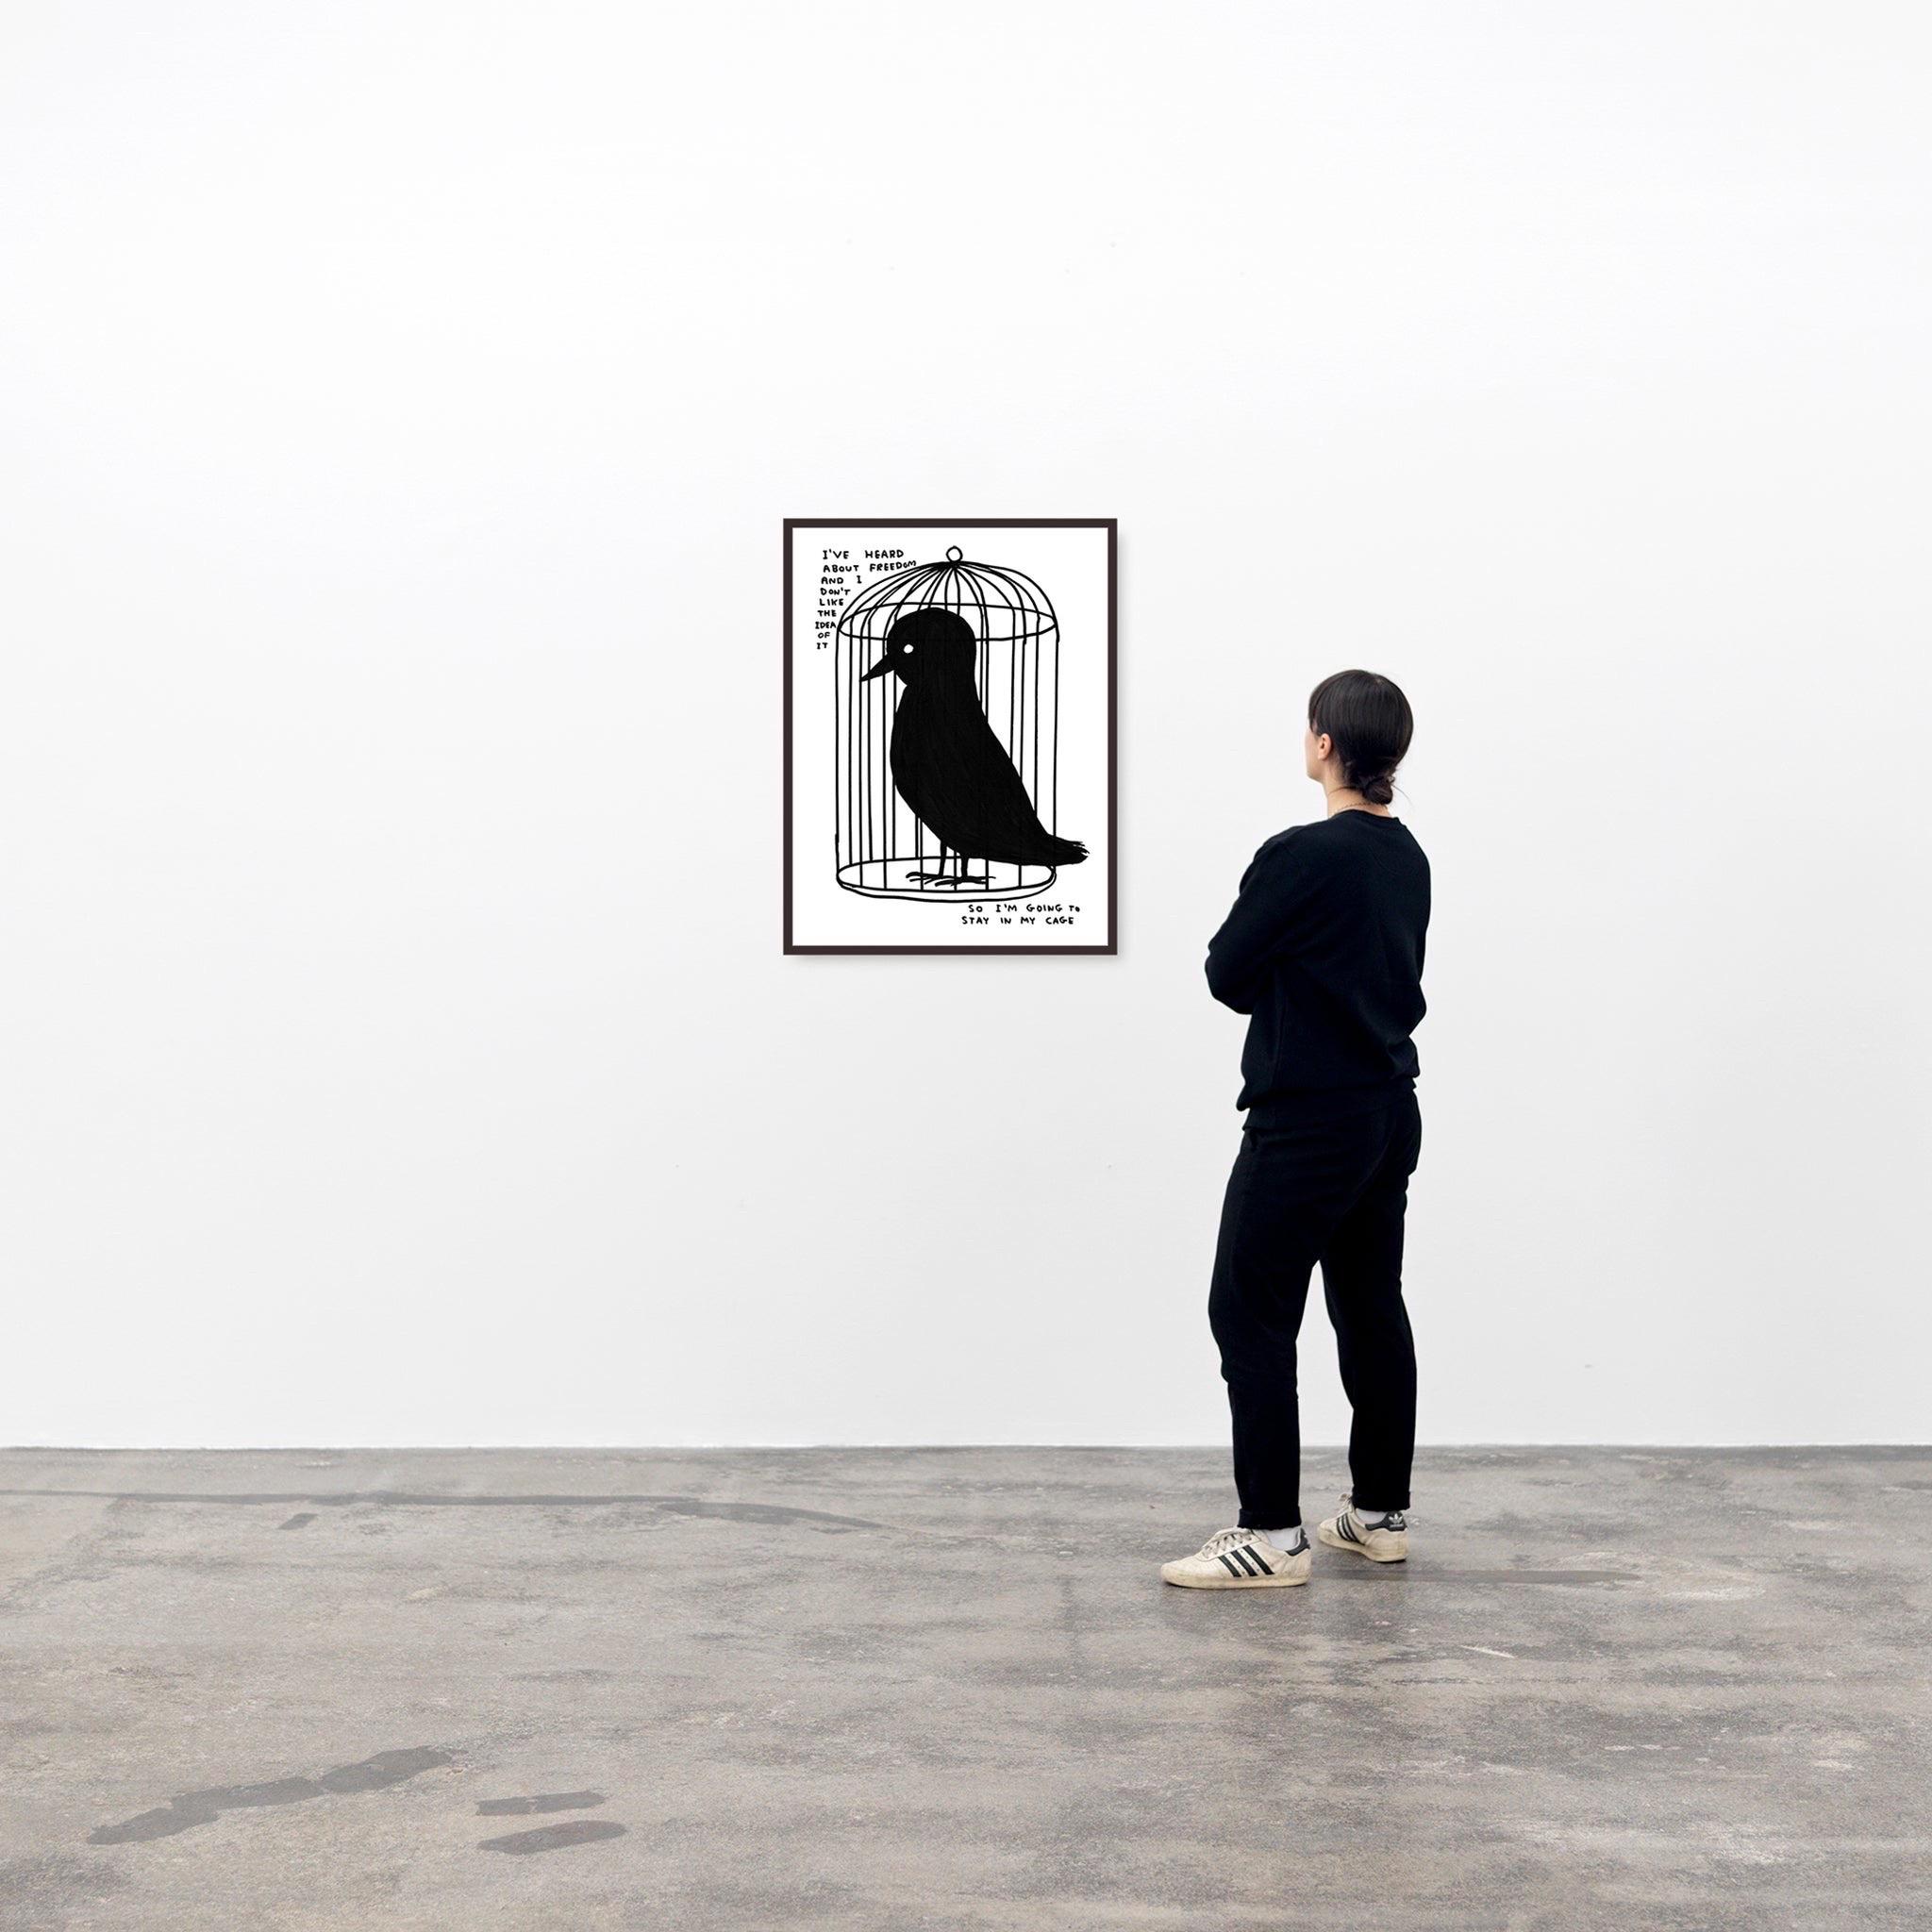 Animals and Existentialism - Complete set of four Edition of 250 David Shrigley prints released April 2022. 

Monkey Isn't Thinking About You (2021)
Do Not Eat Him (2021)
I've Heard About Freedom (2021)
How Fast Can You Run? (2020)

Each Print:
70 x